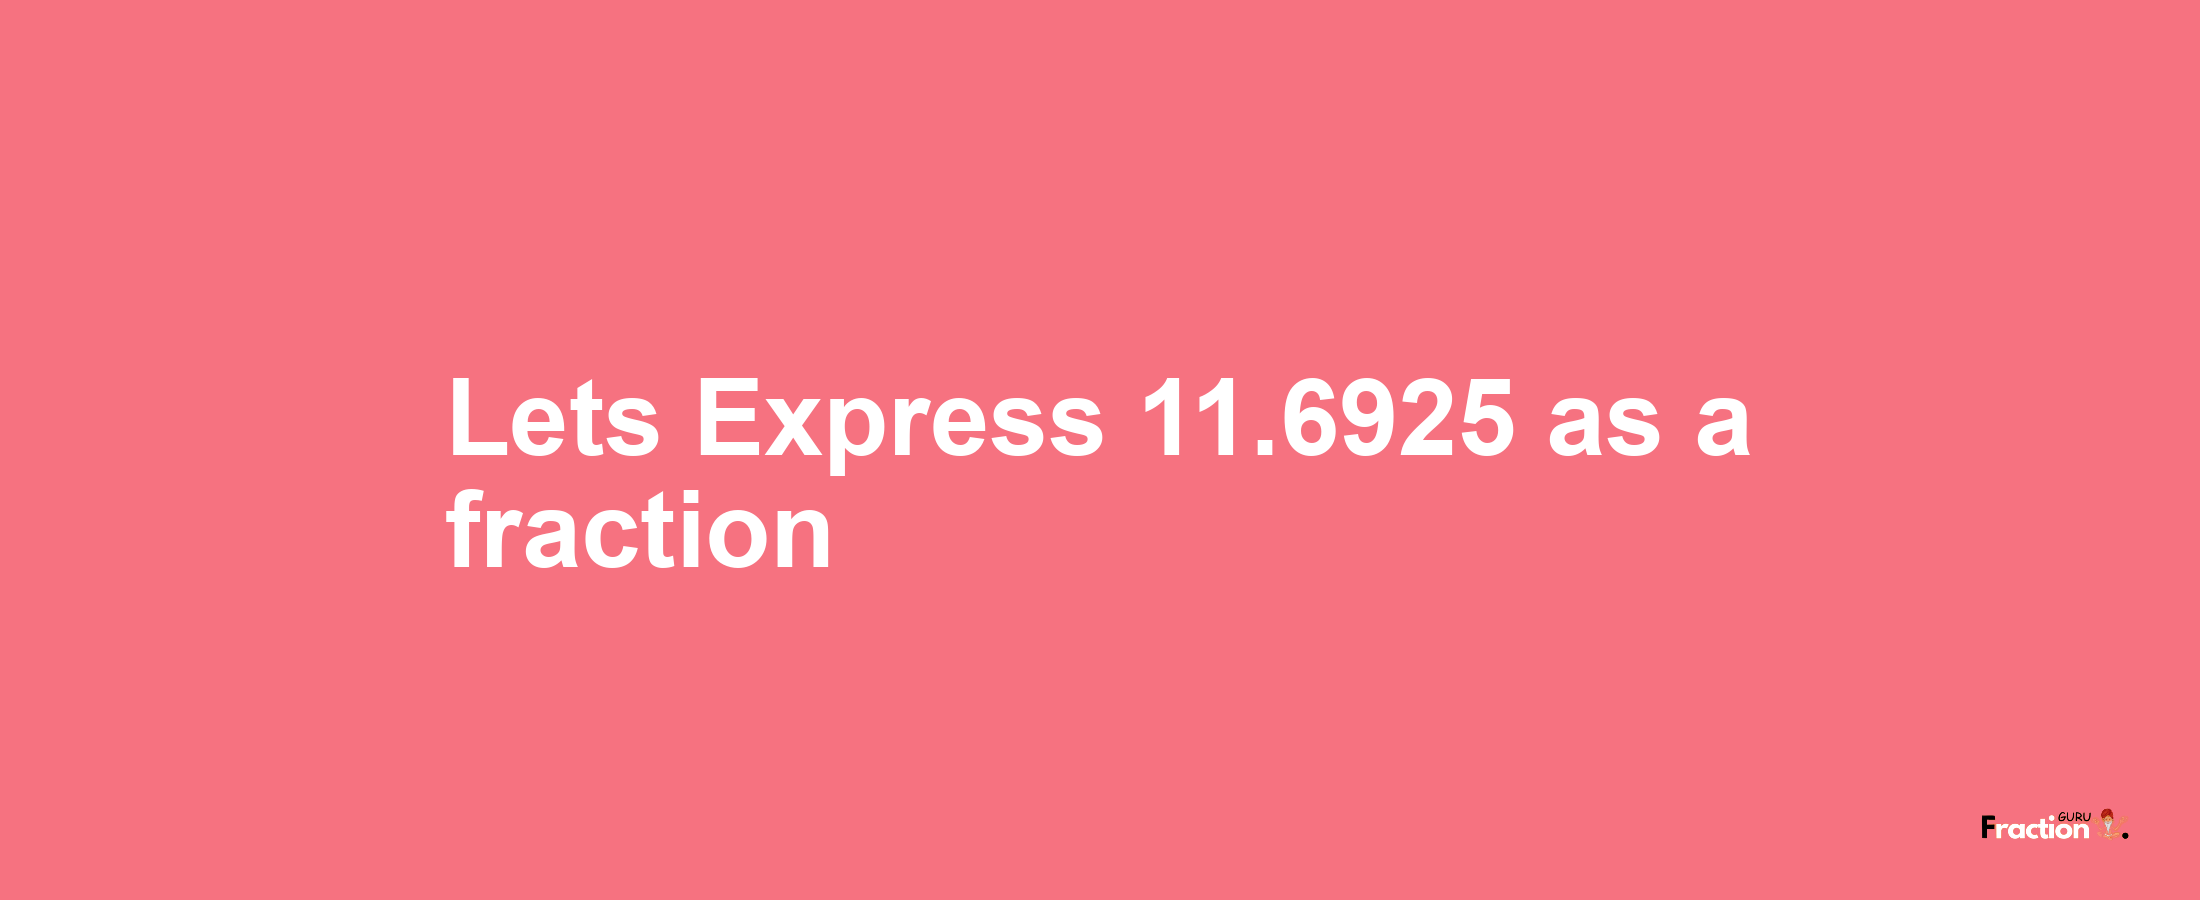 Lets Express 11.6925 as afraction